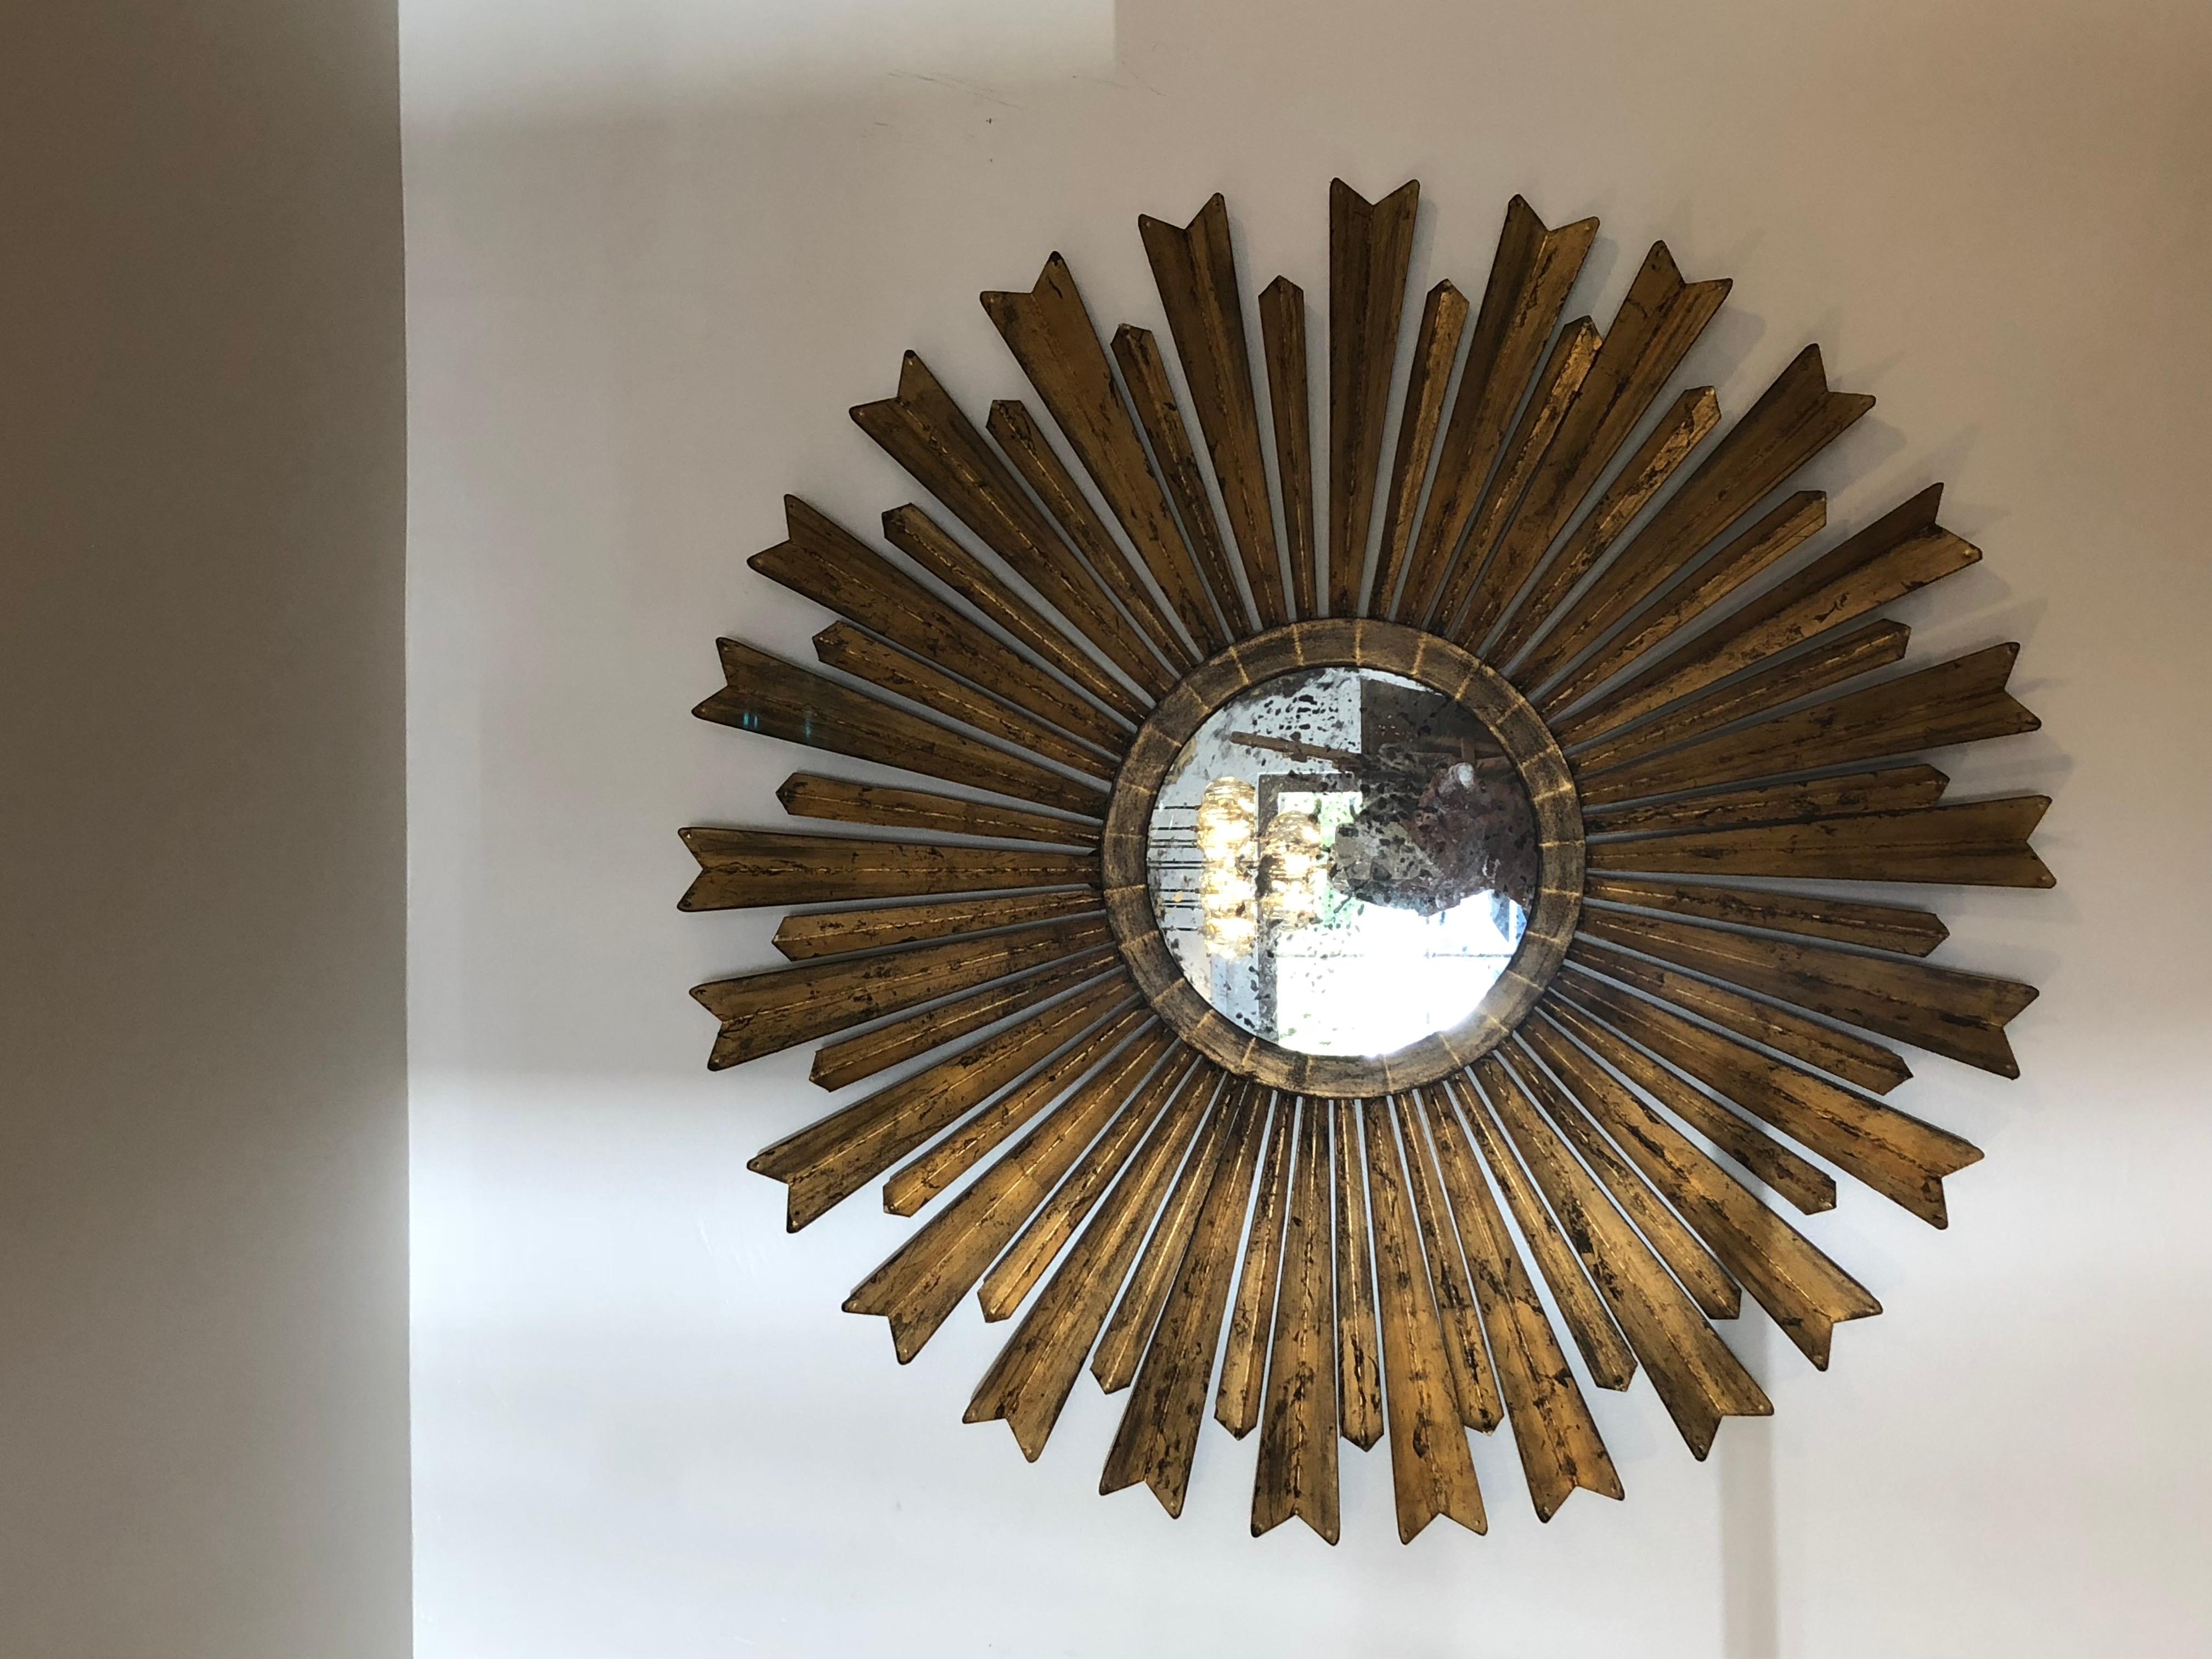 20th century gilt sunburst mirror with patina galore! This beauty has generous proportions measuring 34